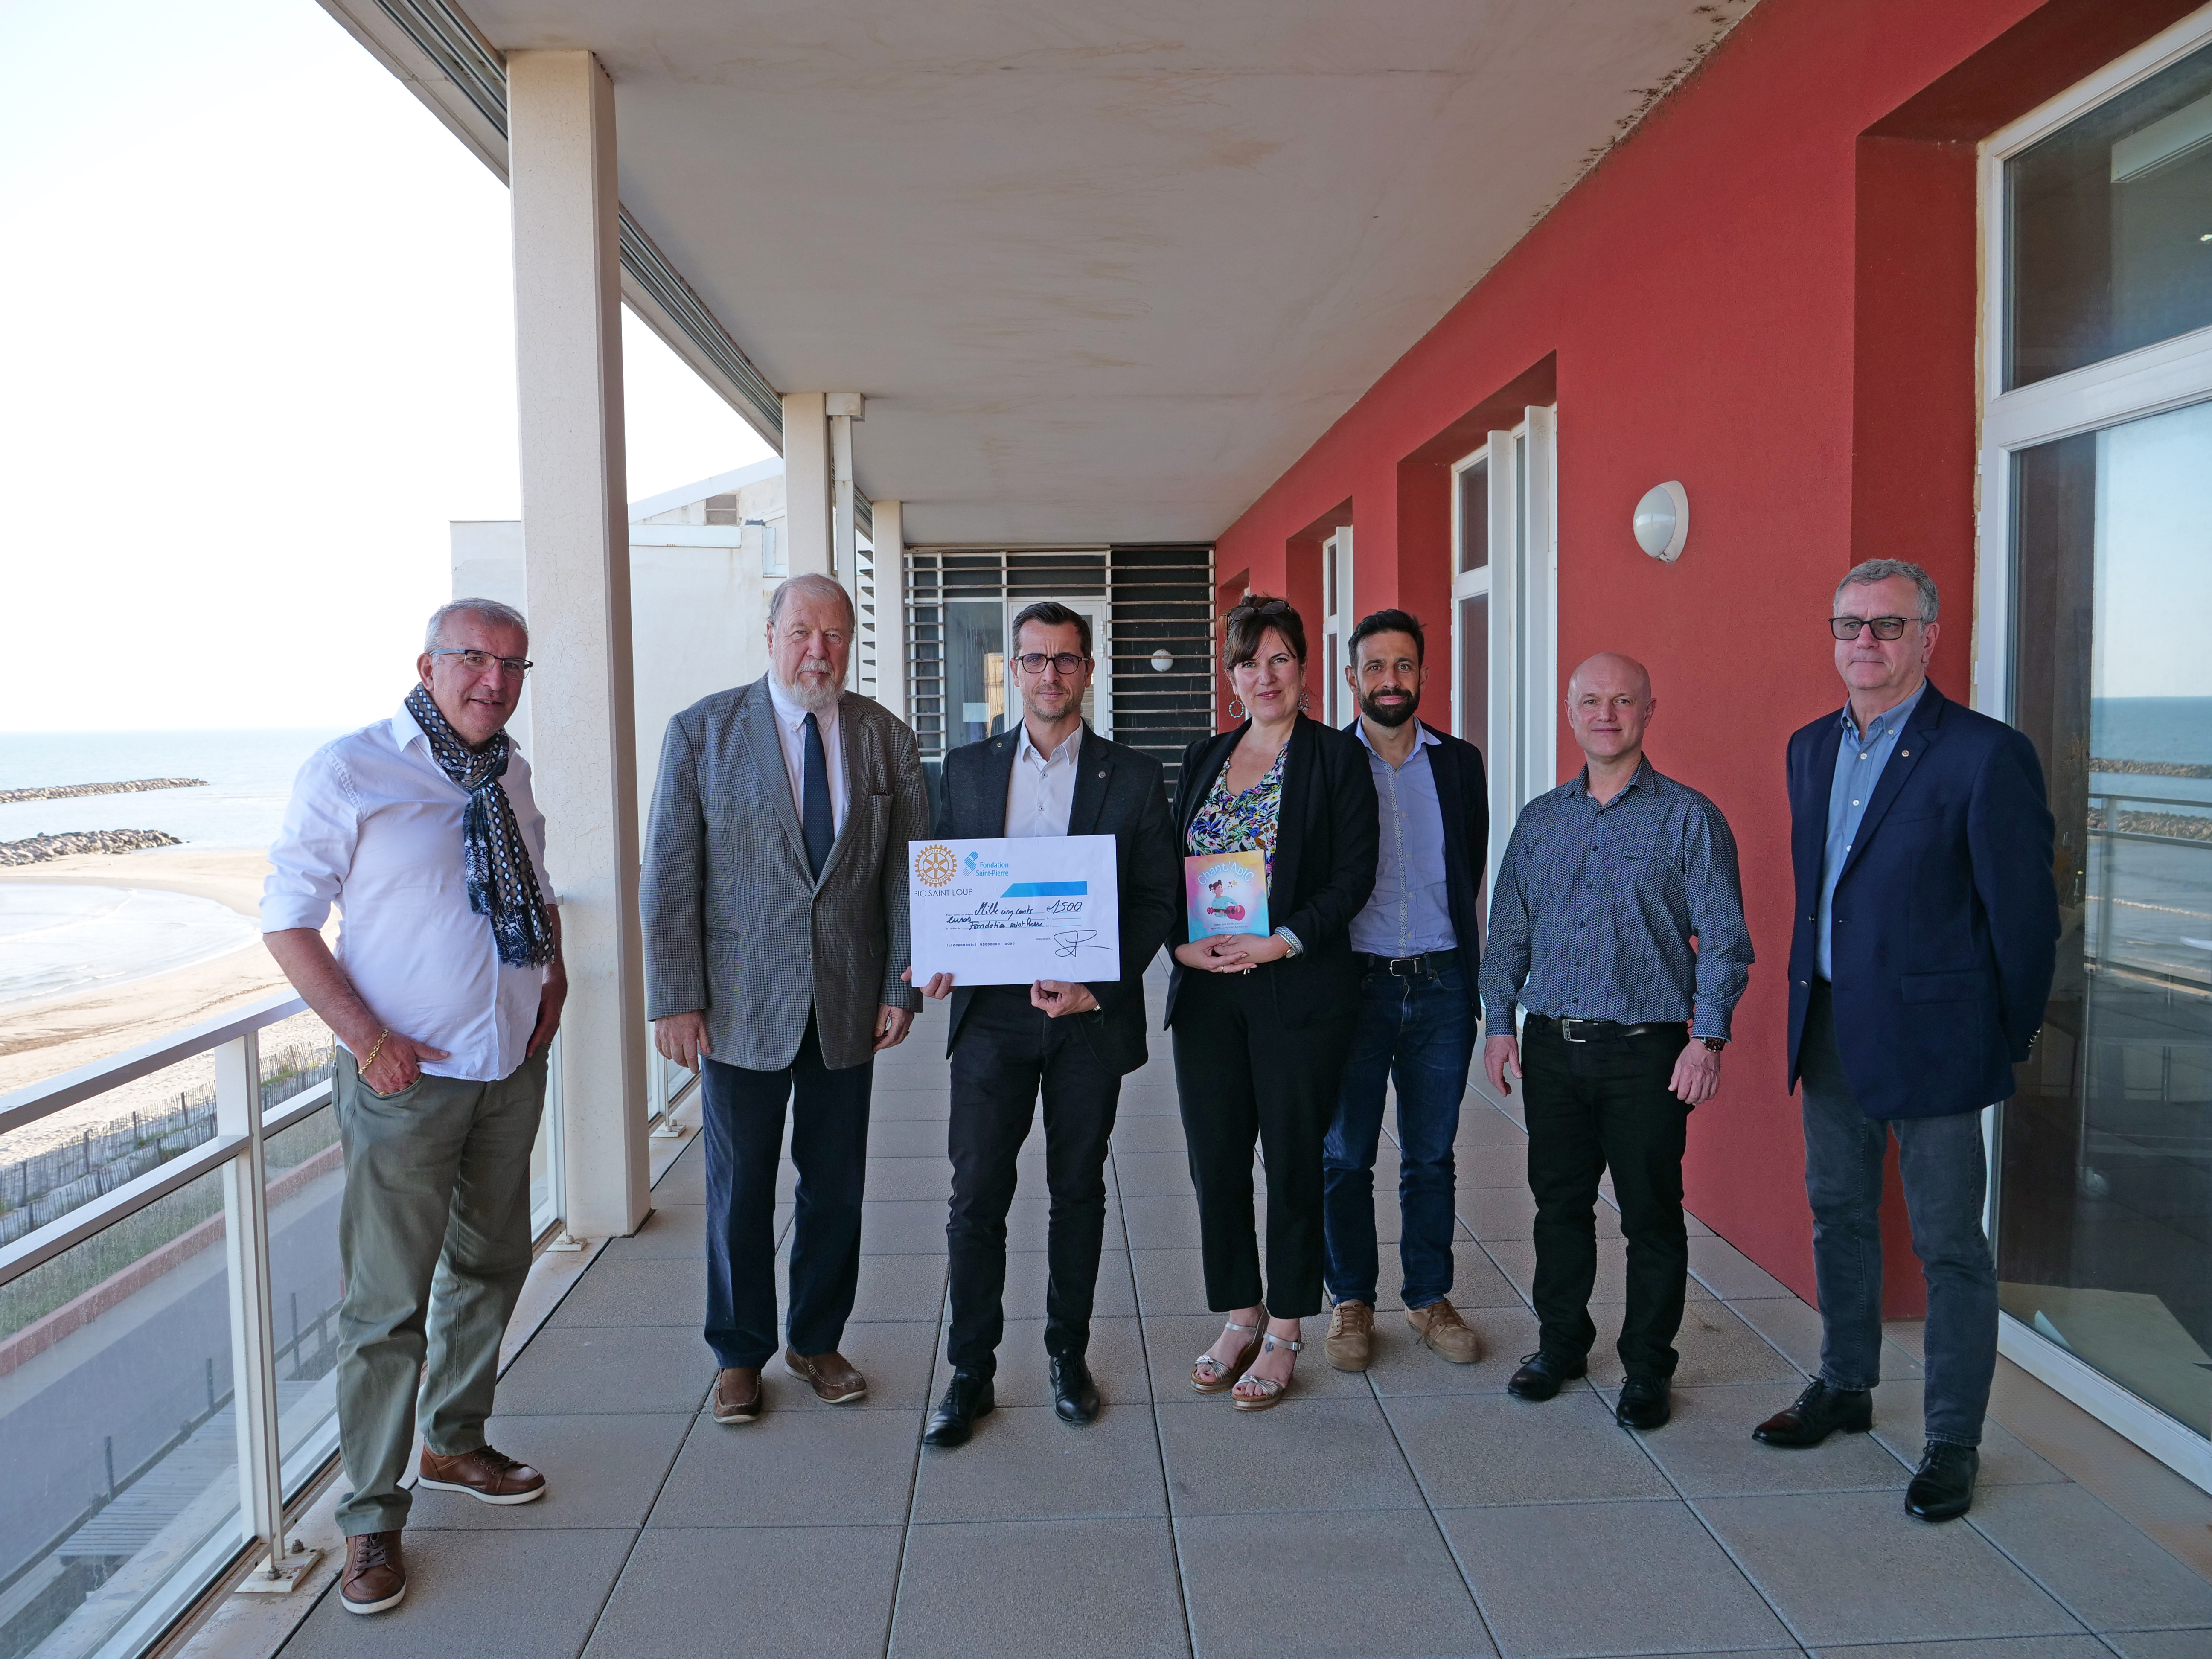 OPÉRATION SOLIDAIRE – ROTARY CLUB DU PIC SAINT-LOUP